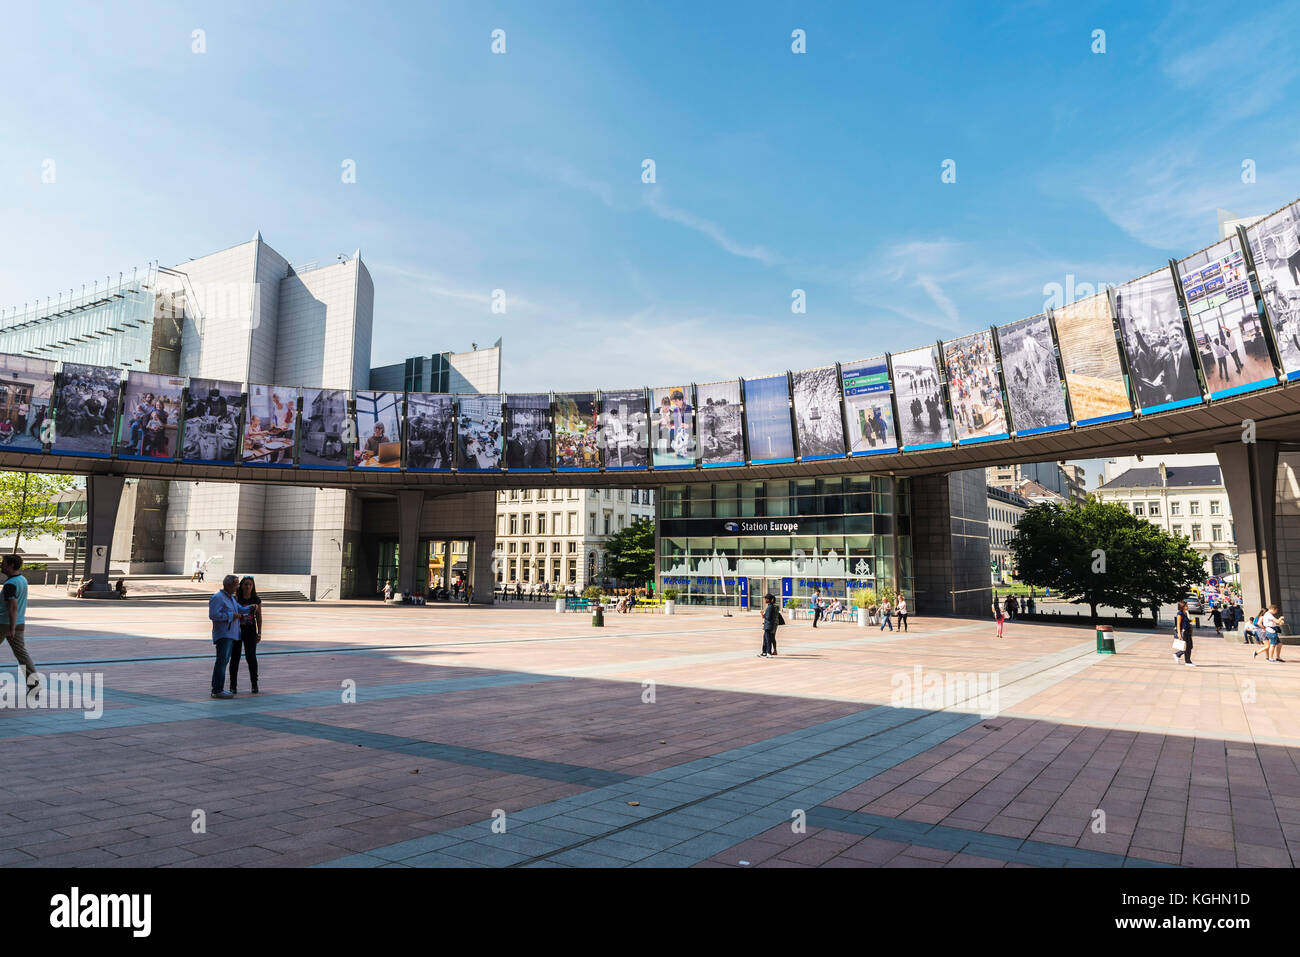 Brussels, Belgium - August 28, 2017: Facade of the modern office buildings of the European Parliament and station Europe with people around in Brussel Stock Photo